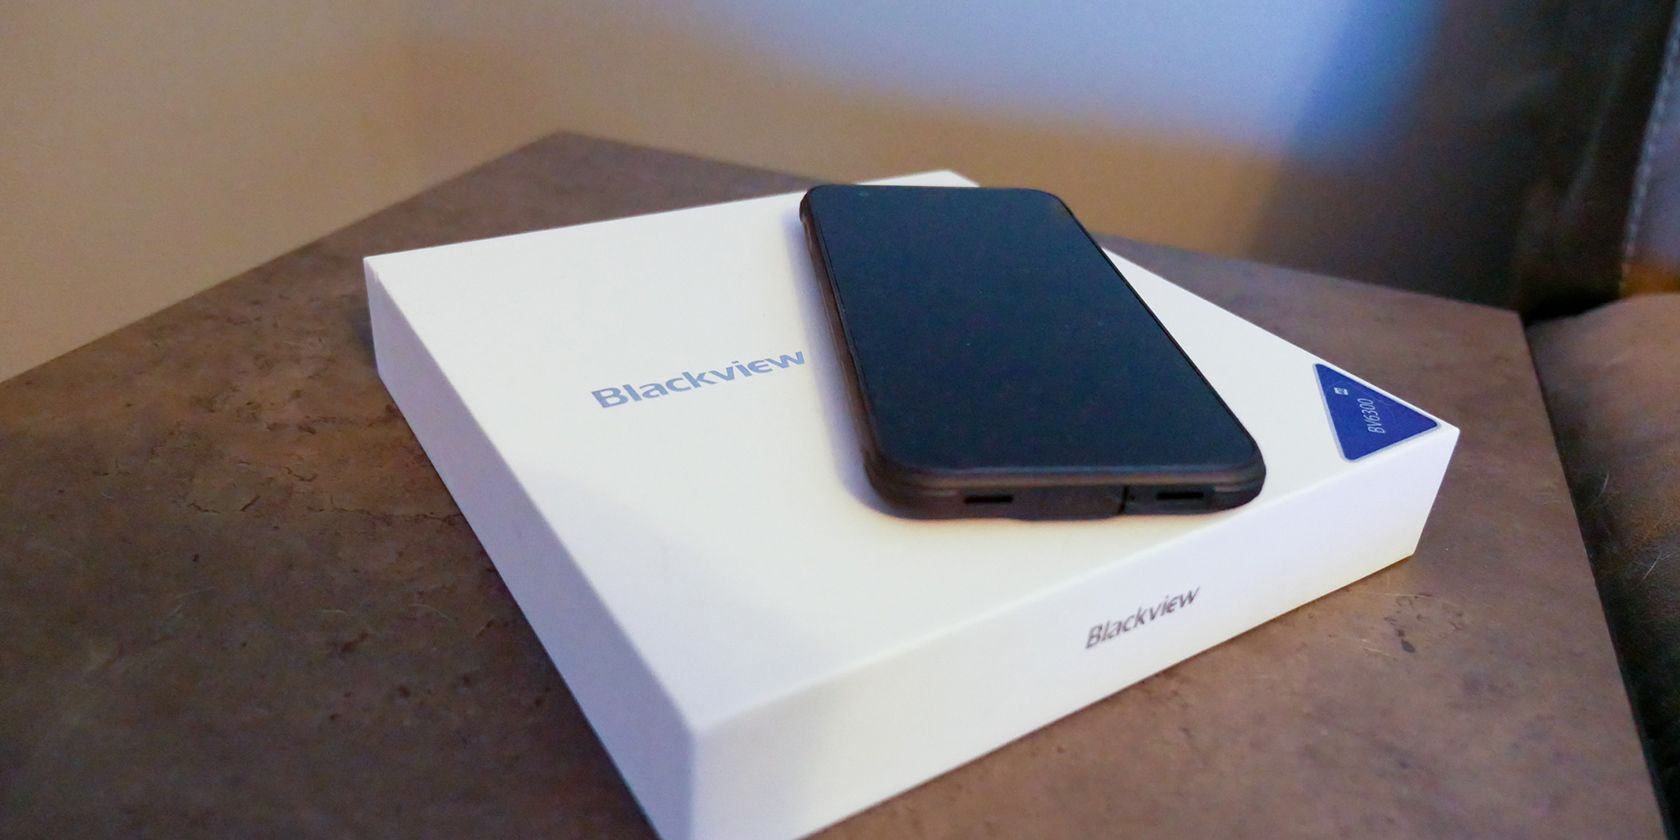 Blackview BV6300 Review: Durable, Affordable, and Entirely Average